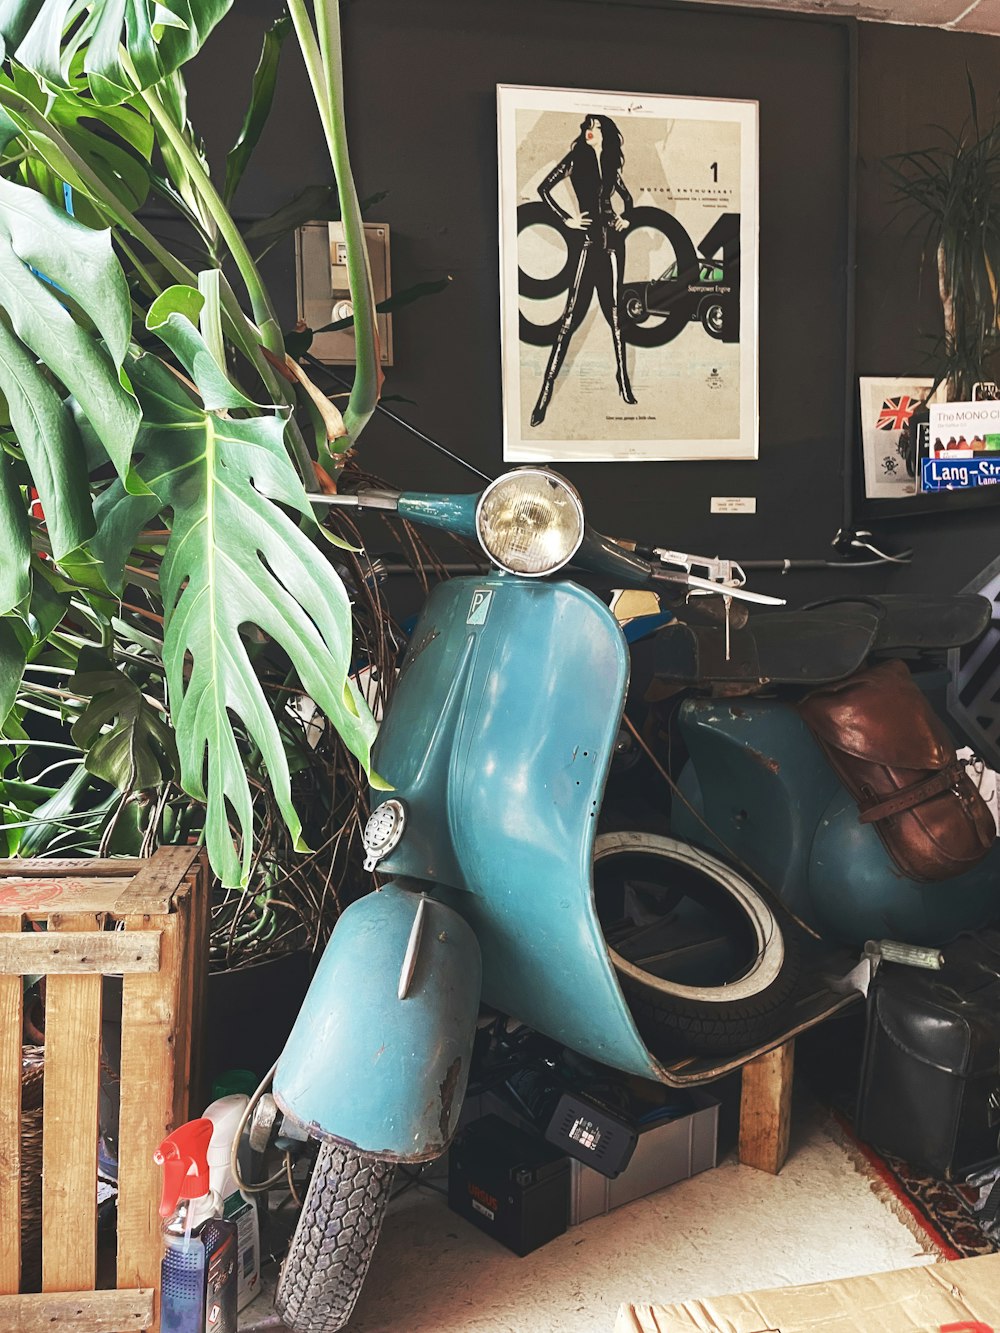 a motorcycle on display in a store